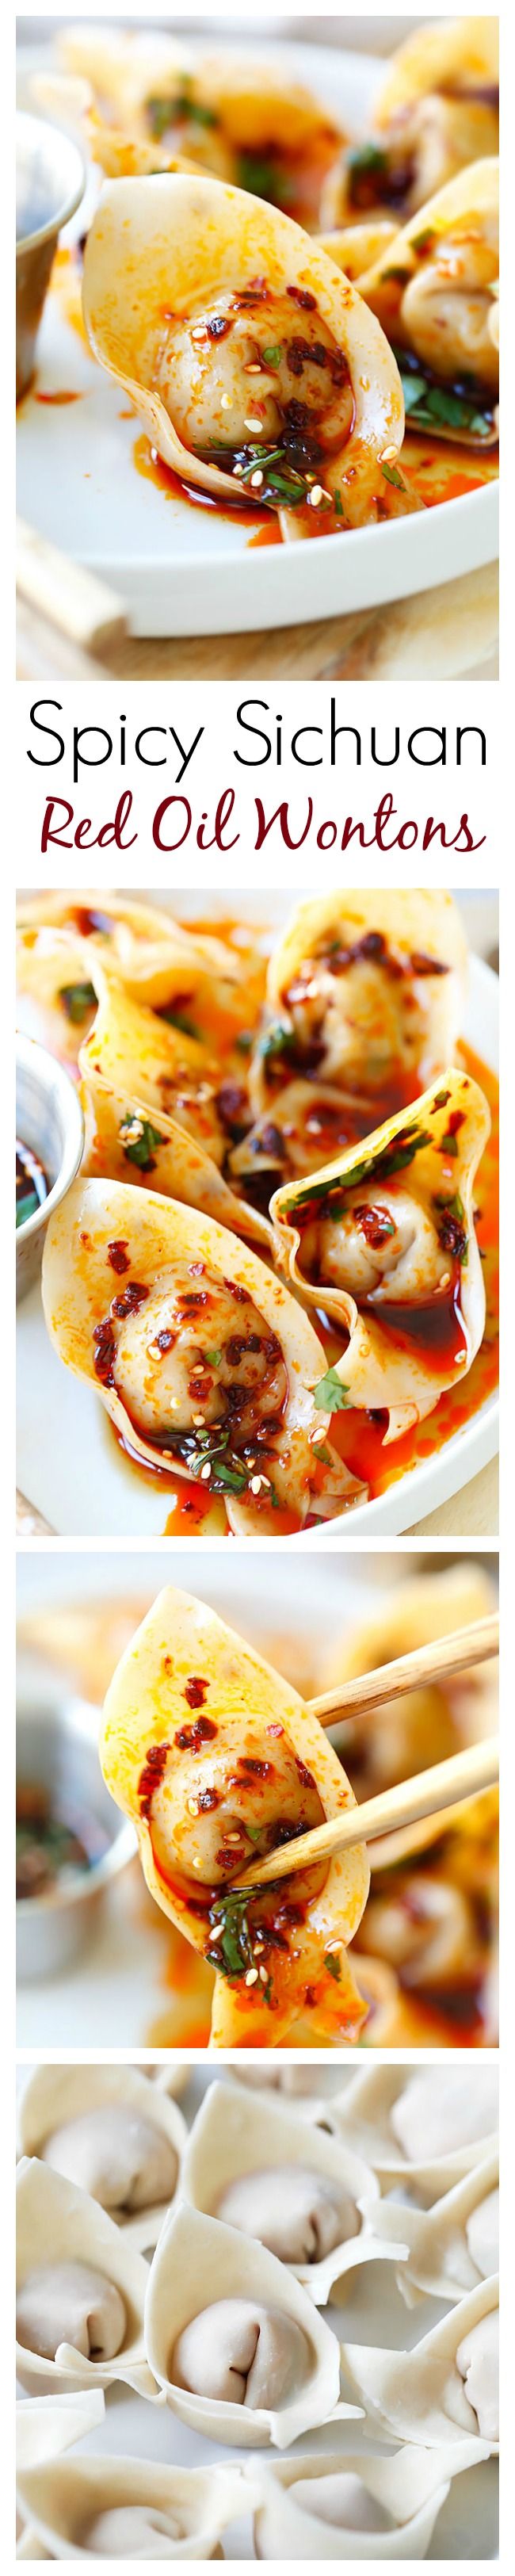 Sichuan Red Oil Wontons – delicious and mouthwatering spicy wontons in Sichuan red oil and black vinegar sauce. Easy recipe for homemade spicy wontons | rasamalaysia.com